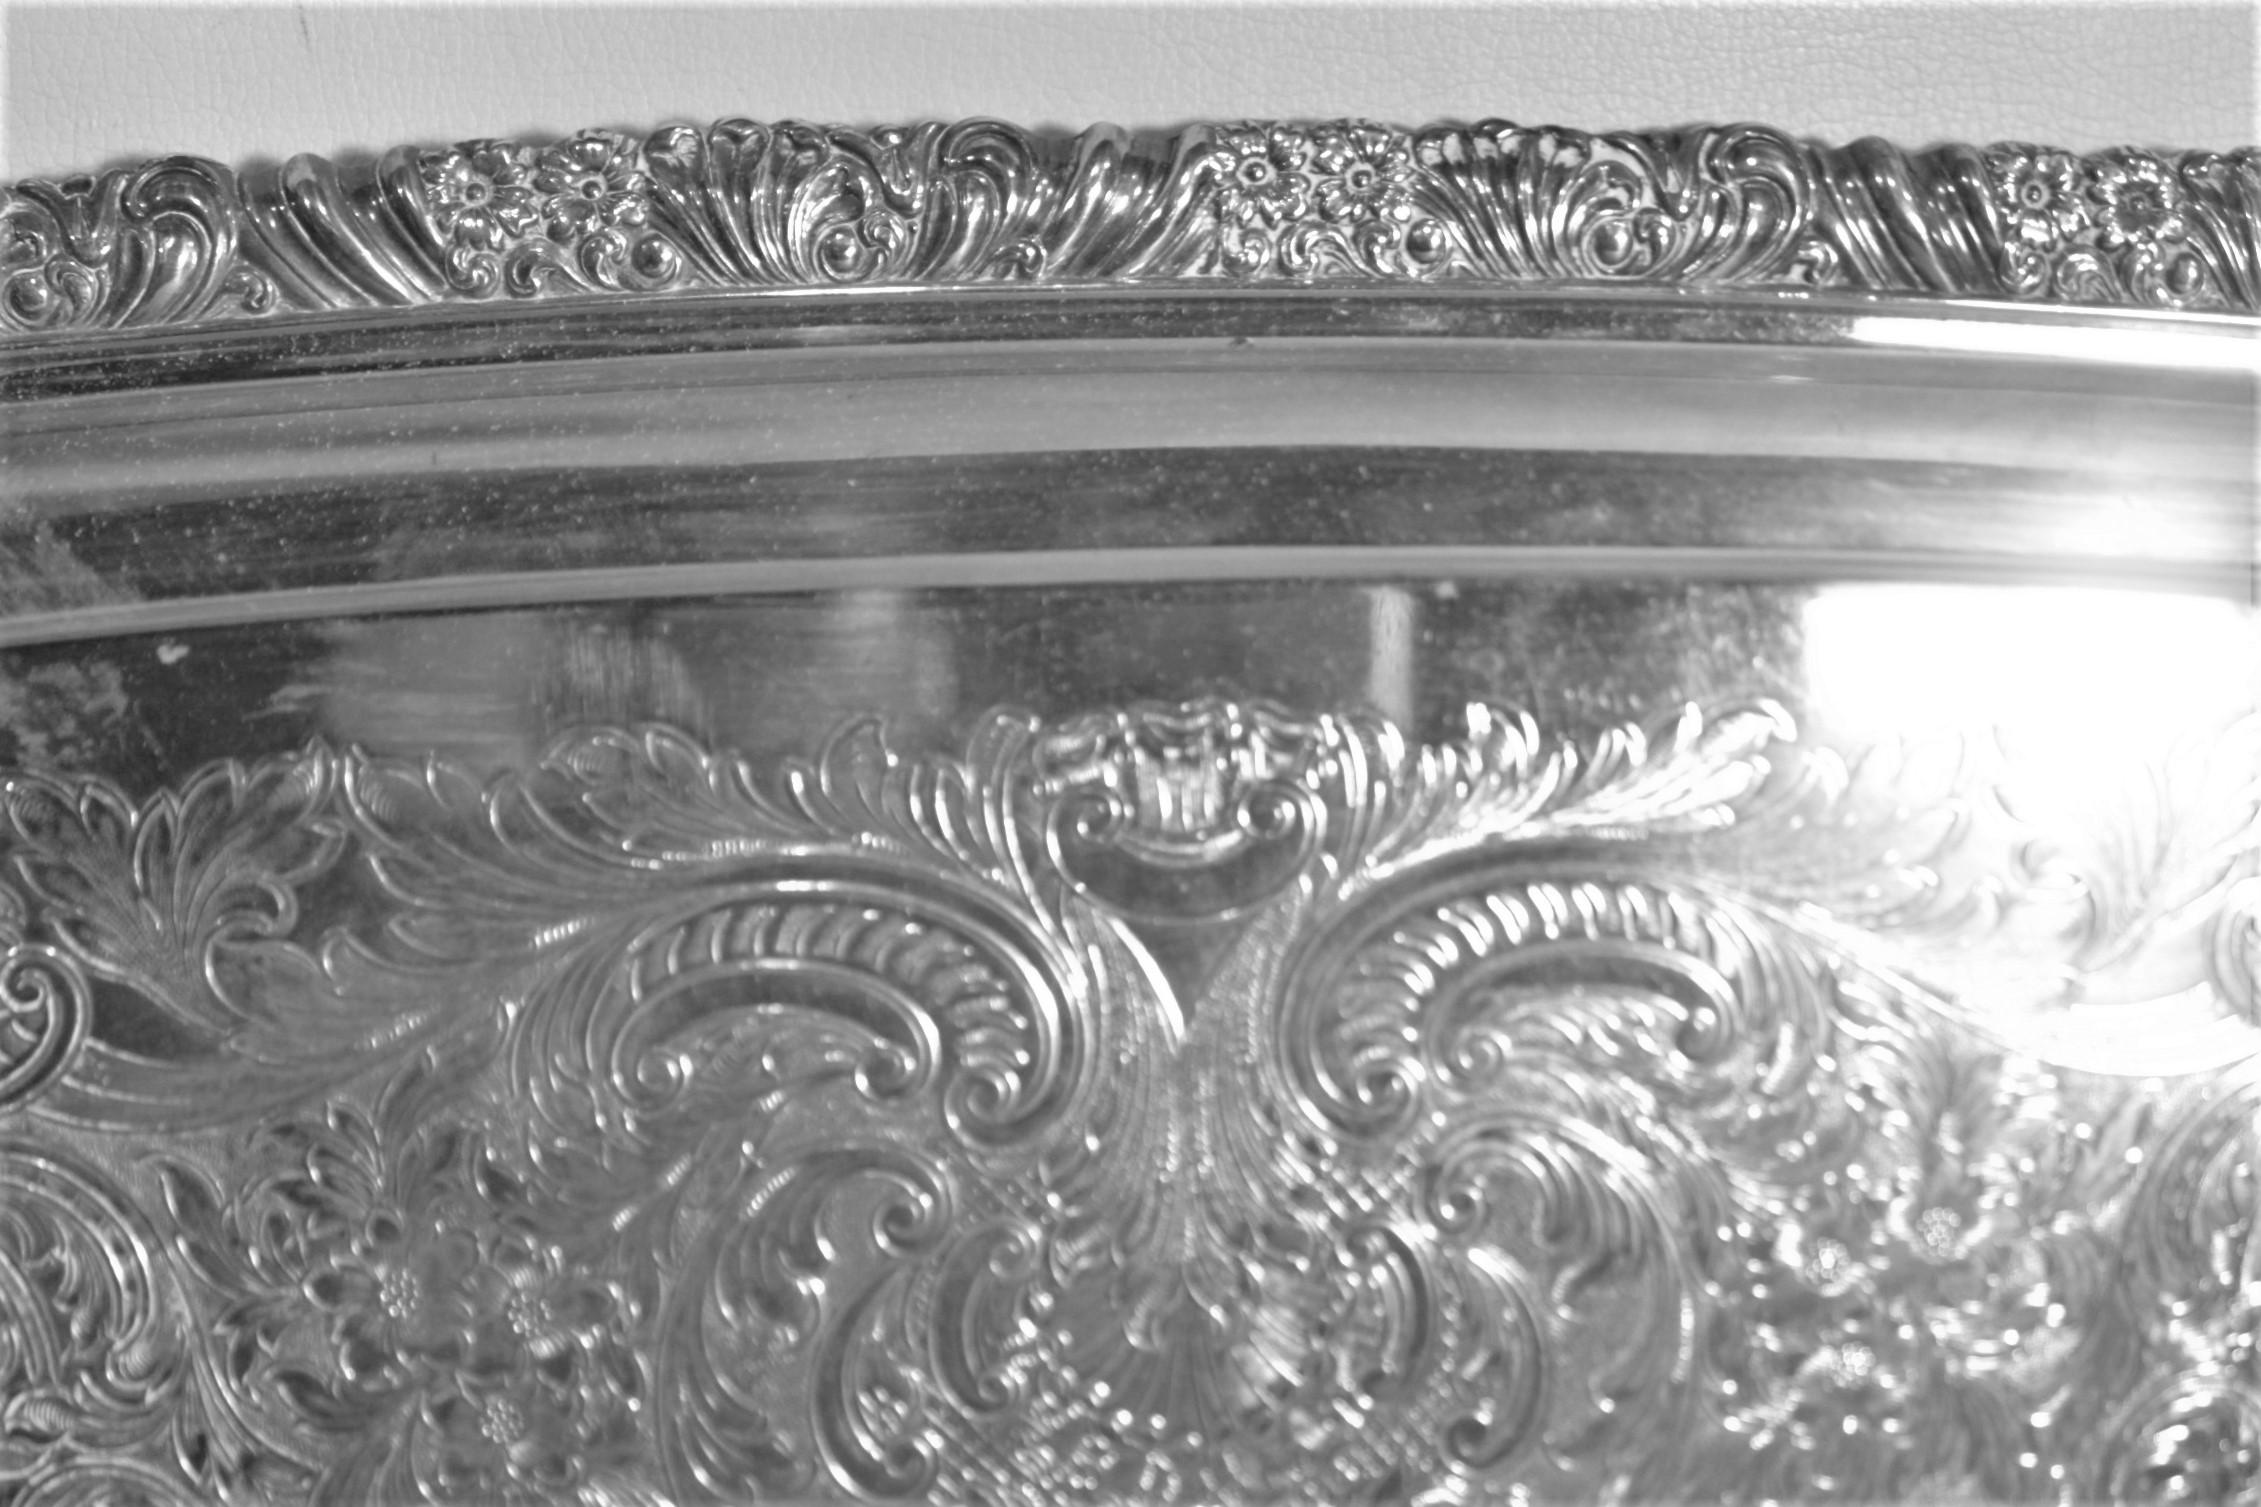 Antique English Silver Plated Serving Tray with Ornate Accents & Engraving For Sale 1